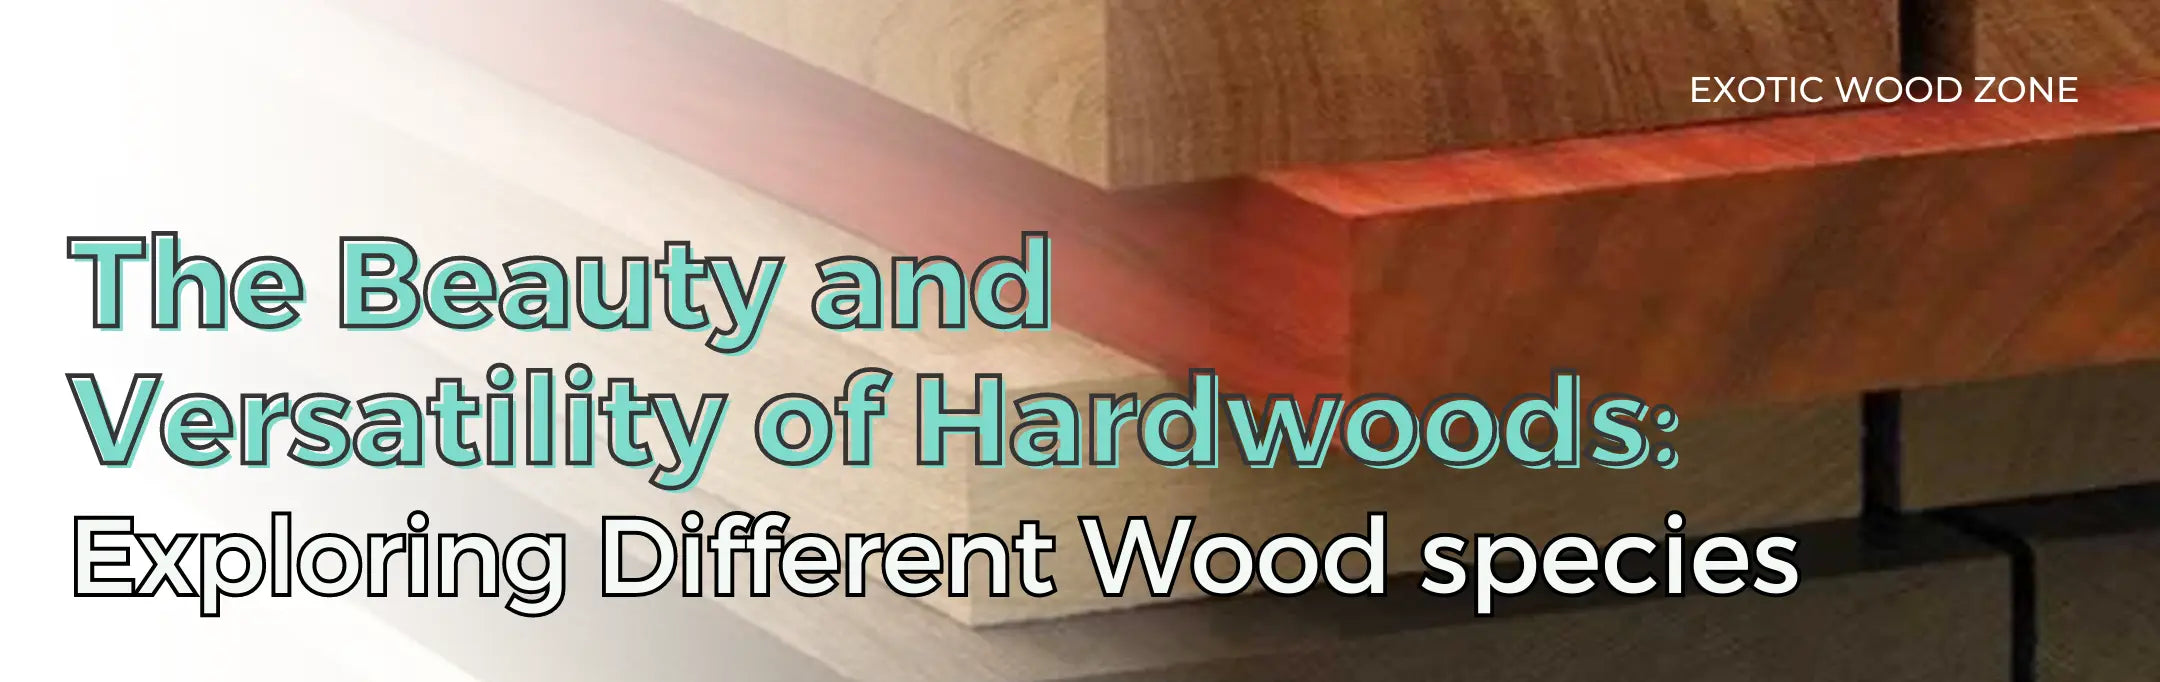 The-Beauty-and-Versatility-of-Hardwoods-Exploring-Different-Wood-Species Exotic Wood Zone